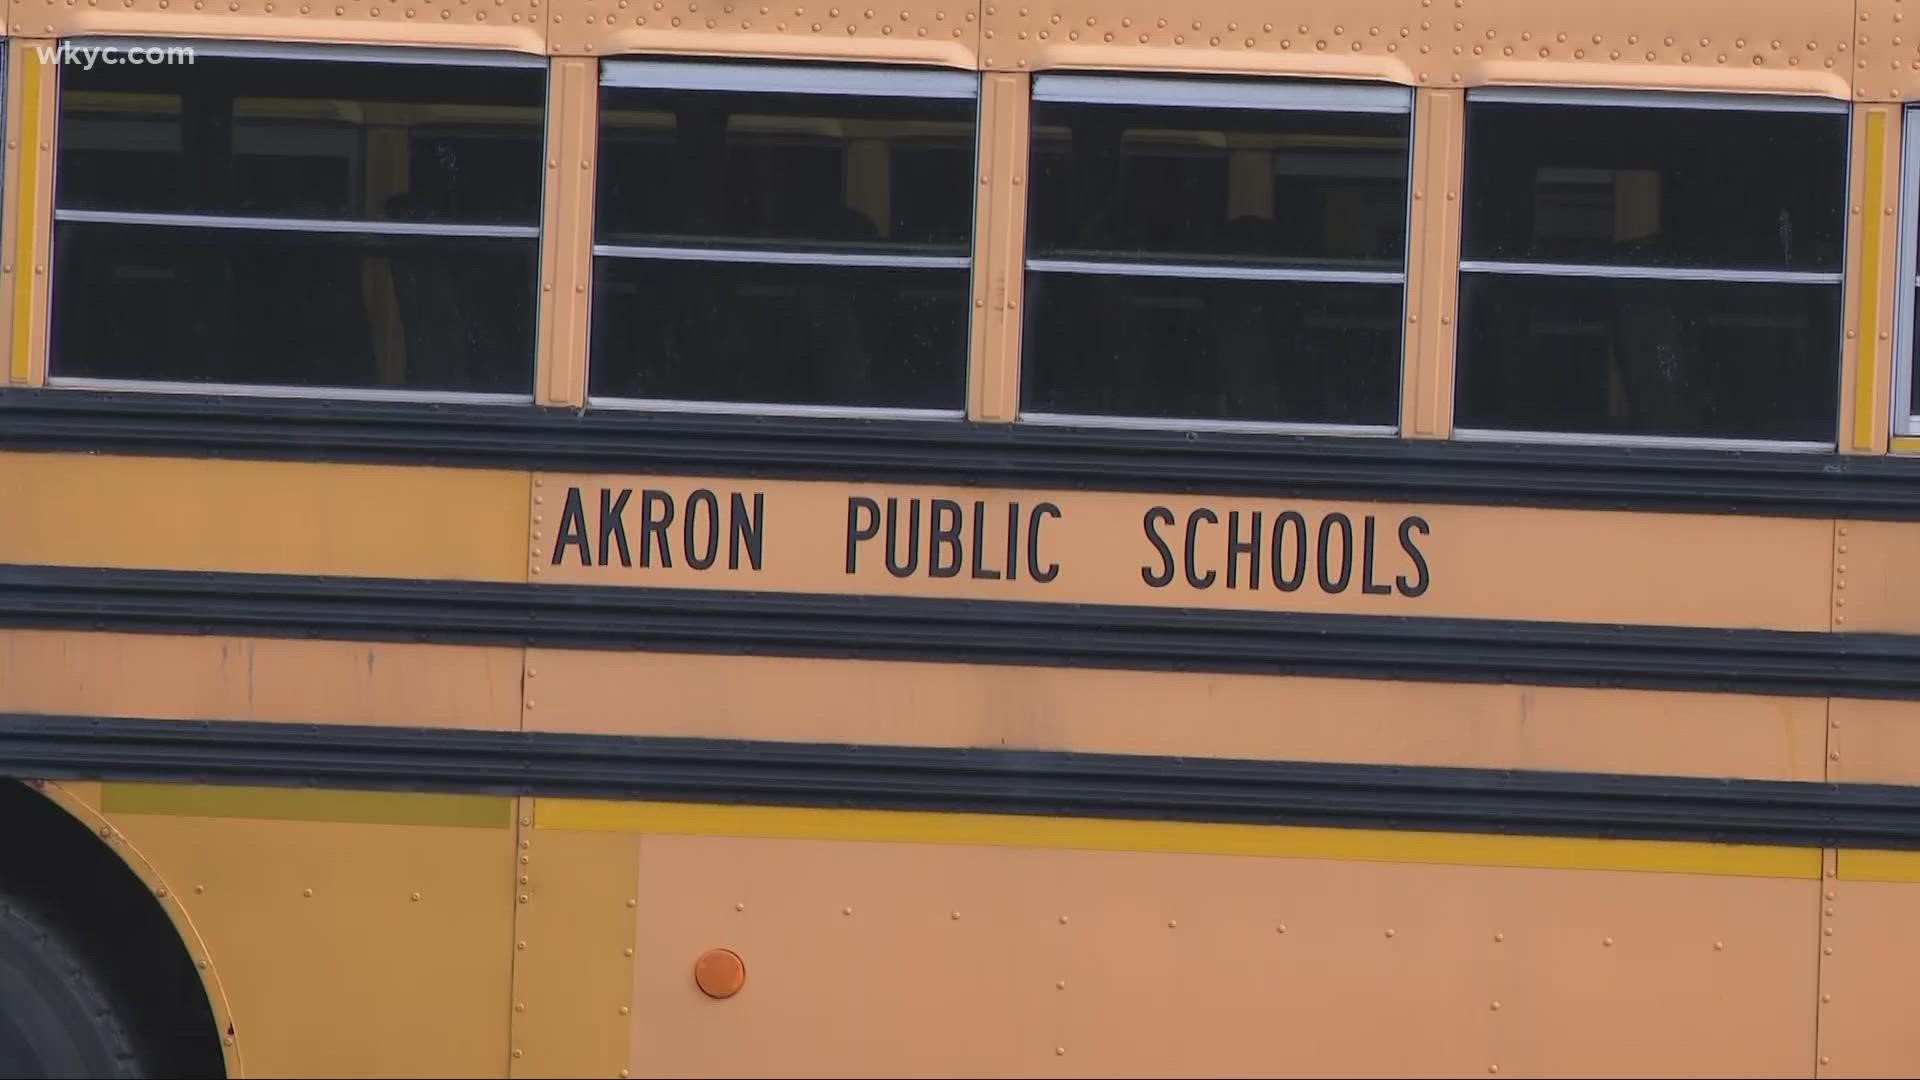 Akron Public Schools are experiencing some issues with a bus driver shortage.